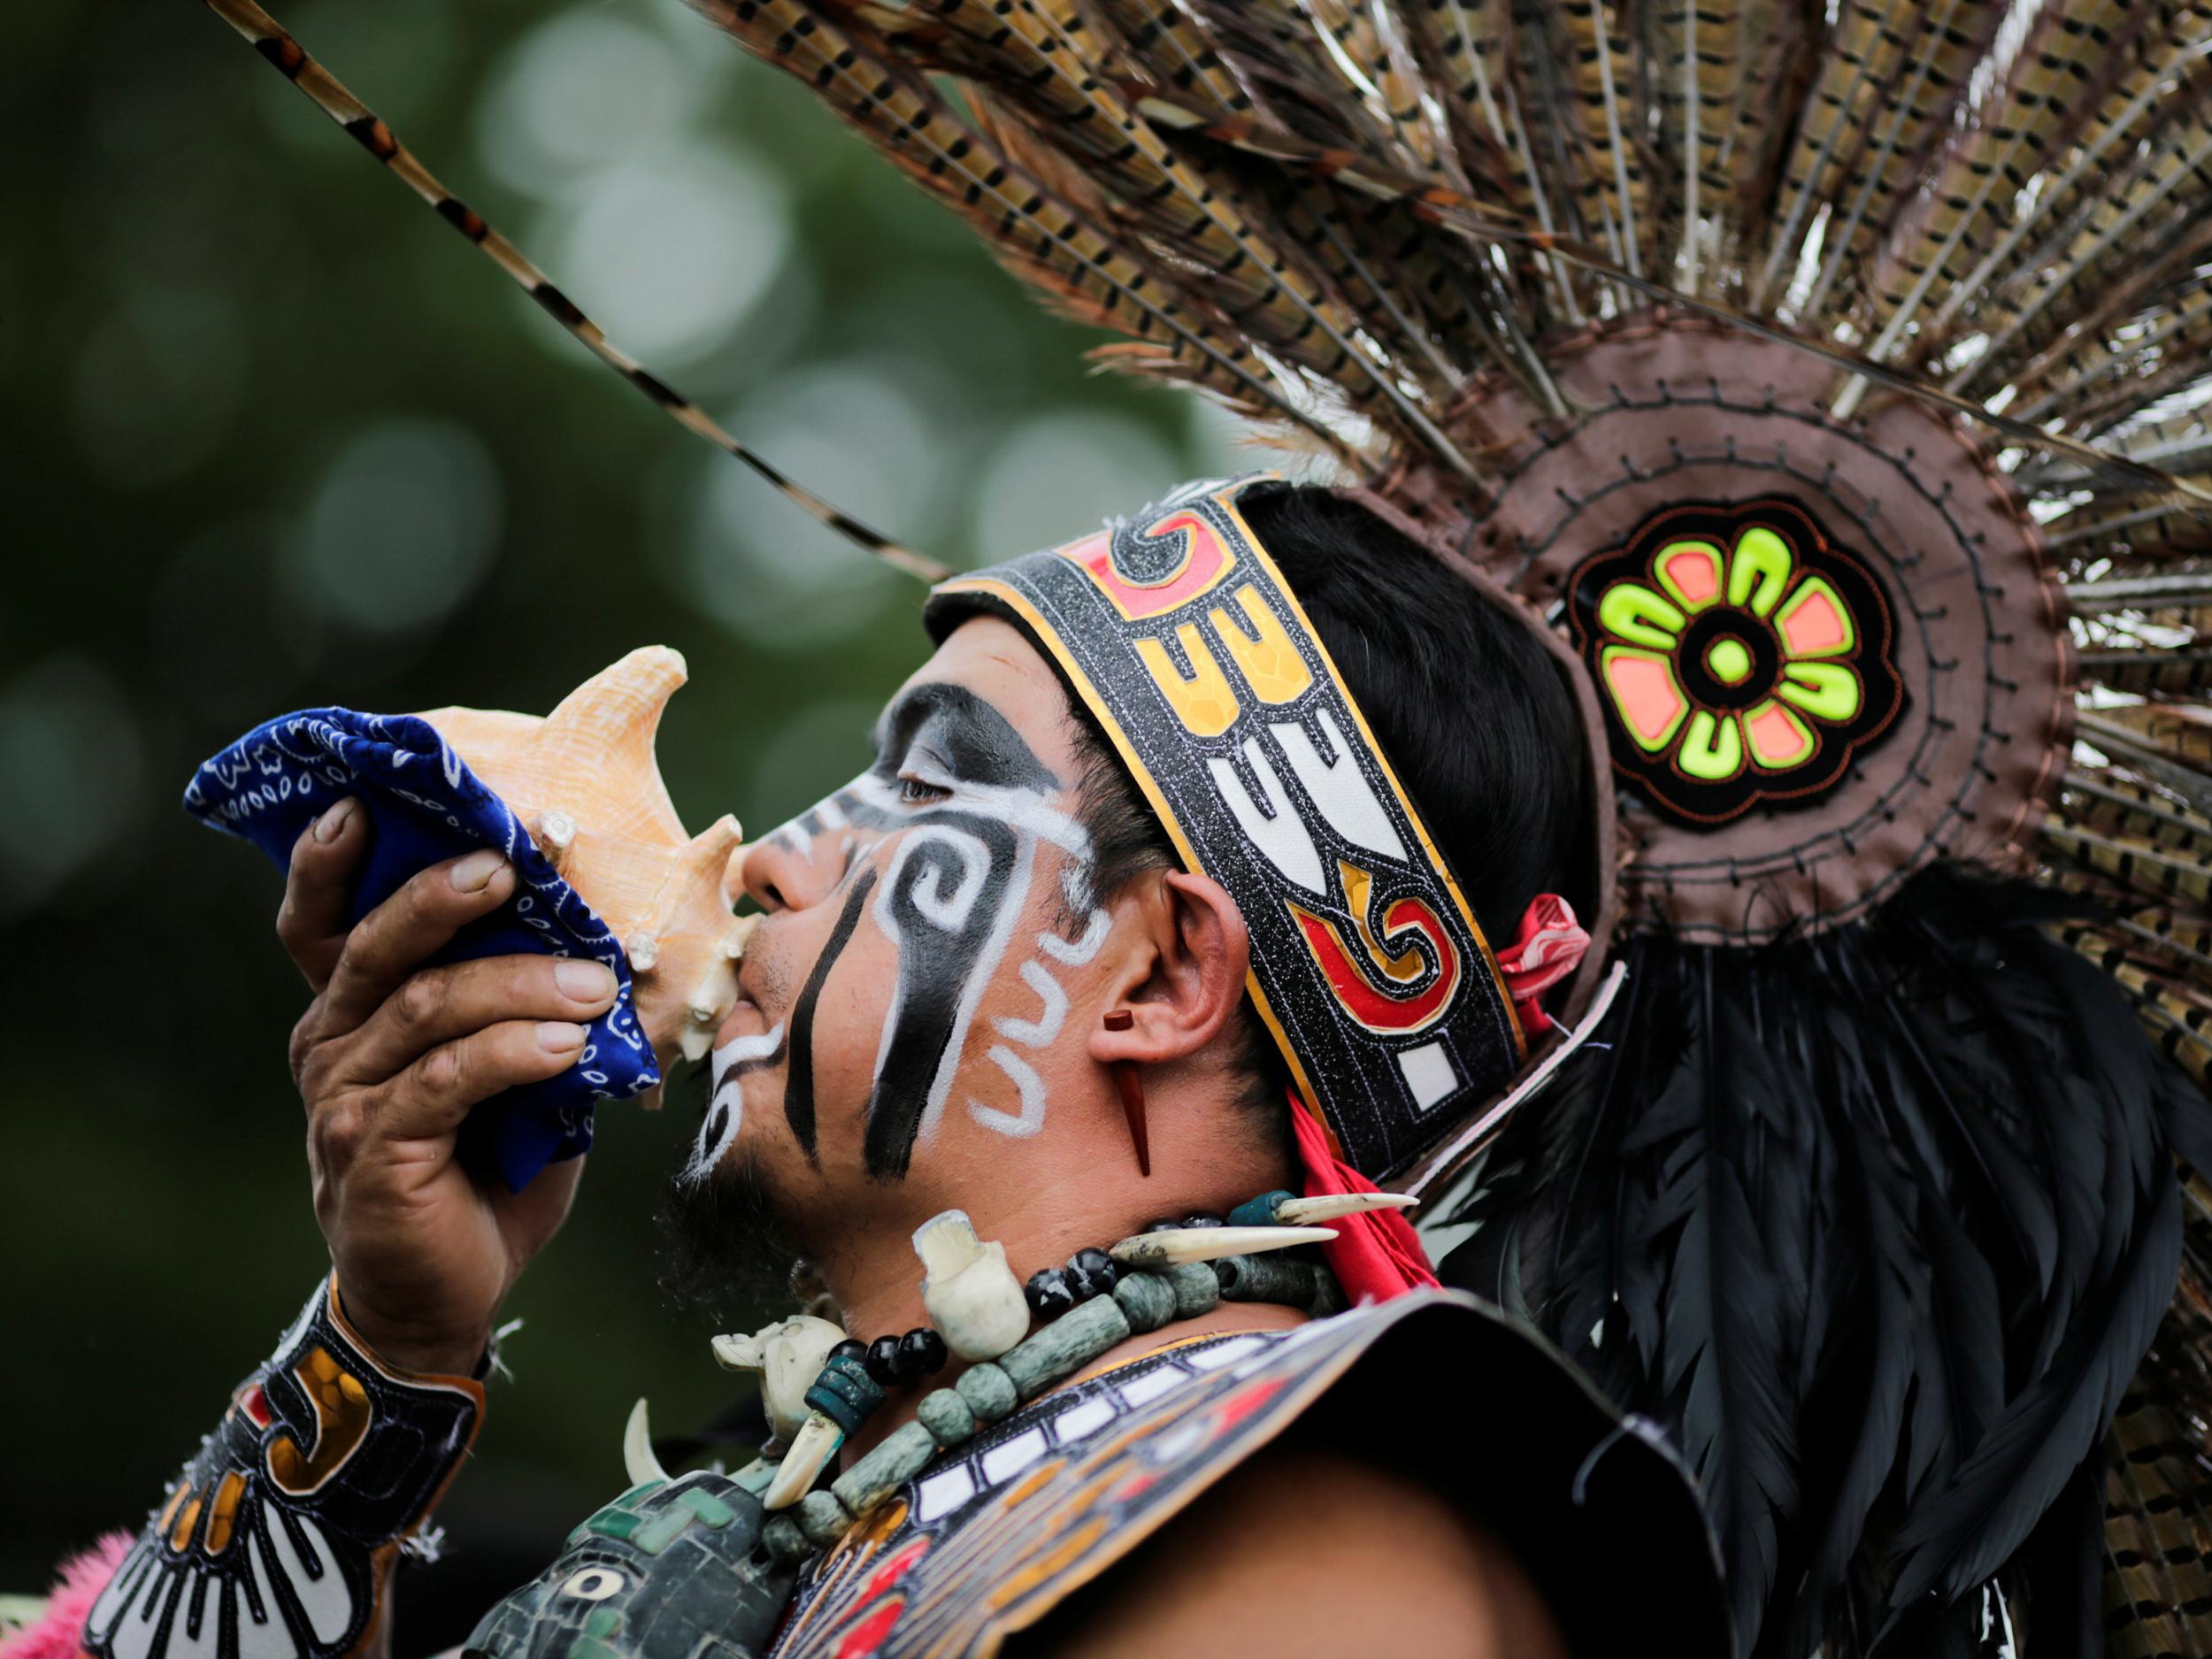 A reveler performs during a "pow-wow" celebrating the Indigenous Peoples' Day Festival in Randalls Island in New York on 8 October 2017